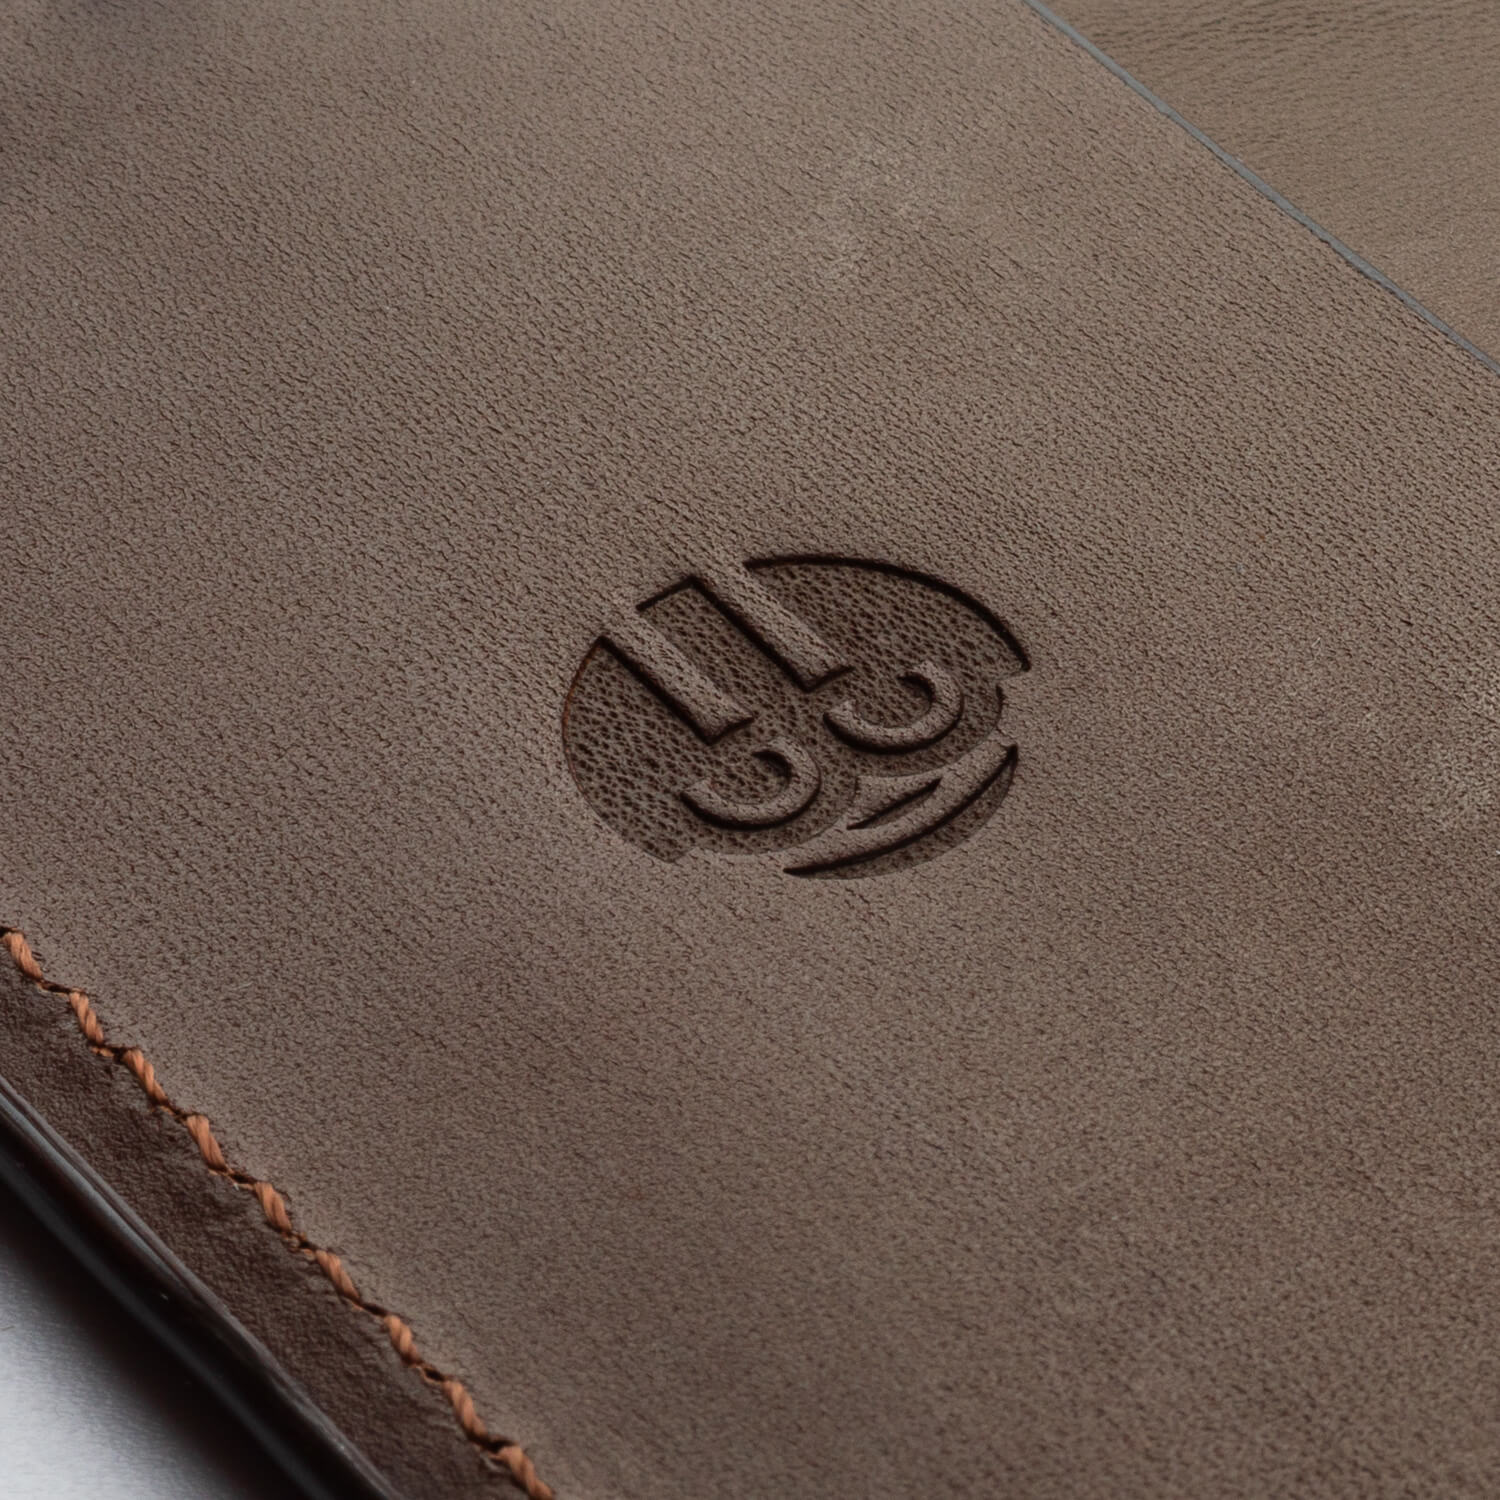 Leather Notebook - Automobilist - Brown